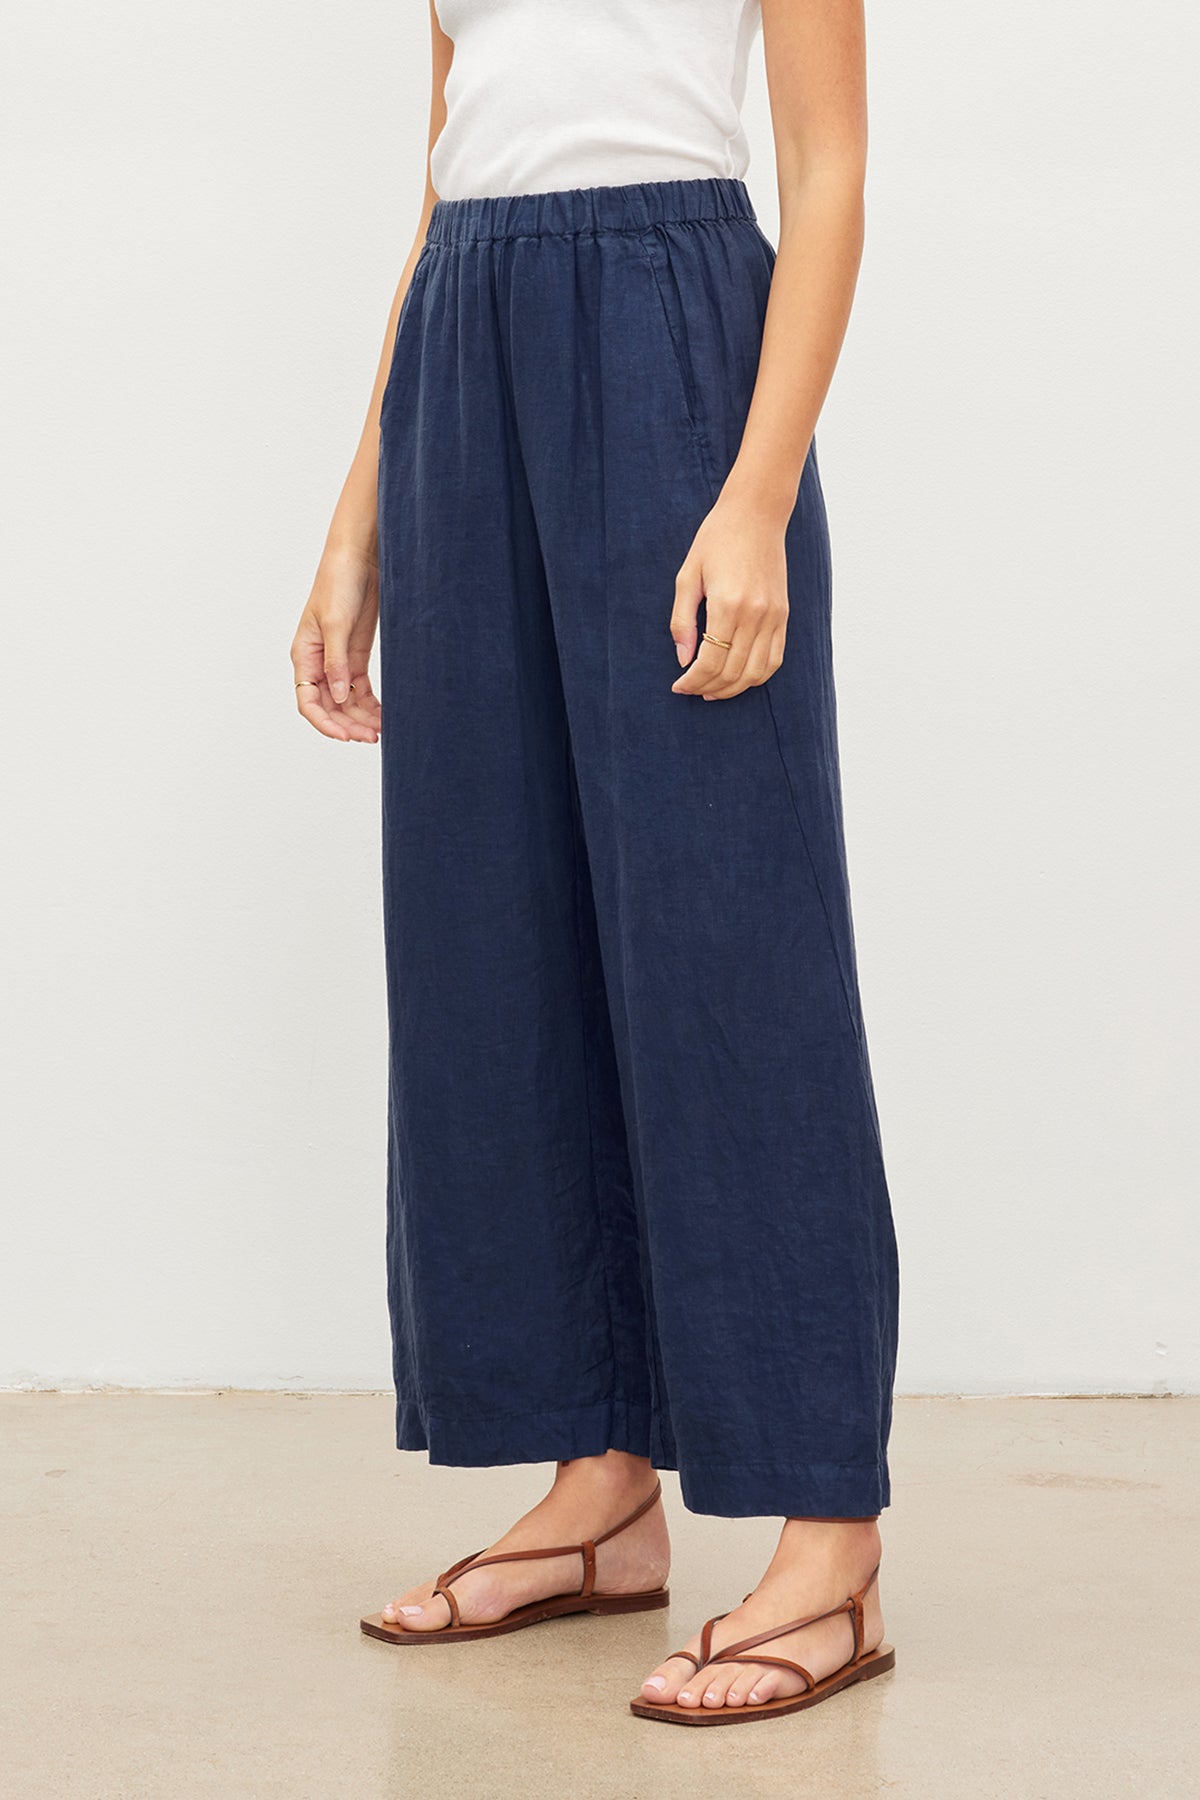   A woman wearing a pair of Velvet by Graham & Spencer LOLA LINEN PANT. The lightweight linen fabric provides comfort and breathability, while the elastic waist ensures a comfortable fit. 